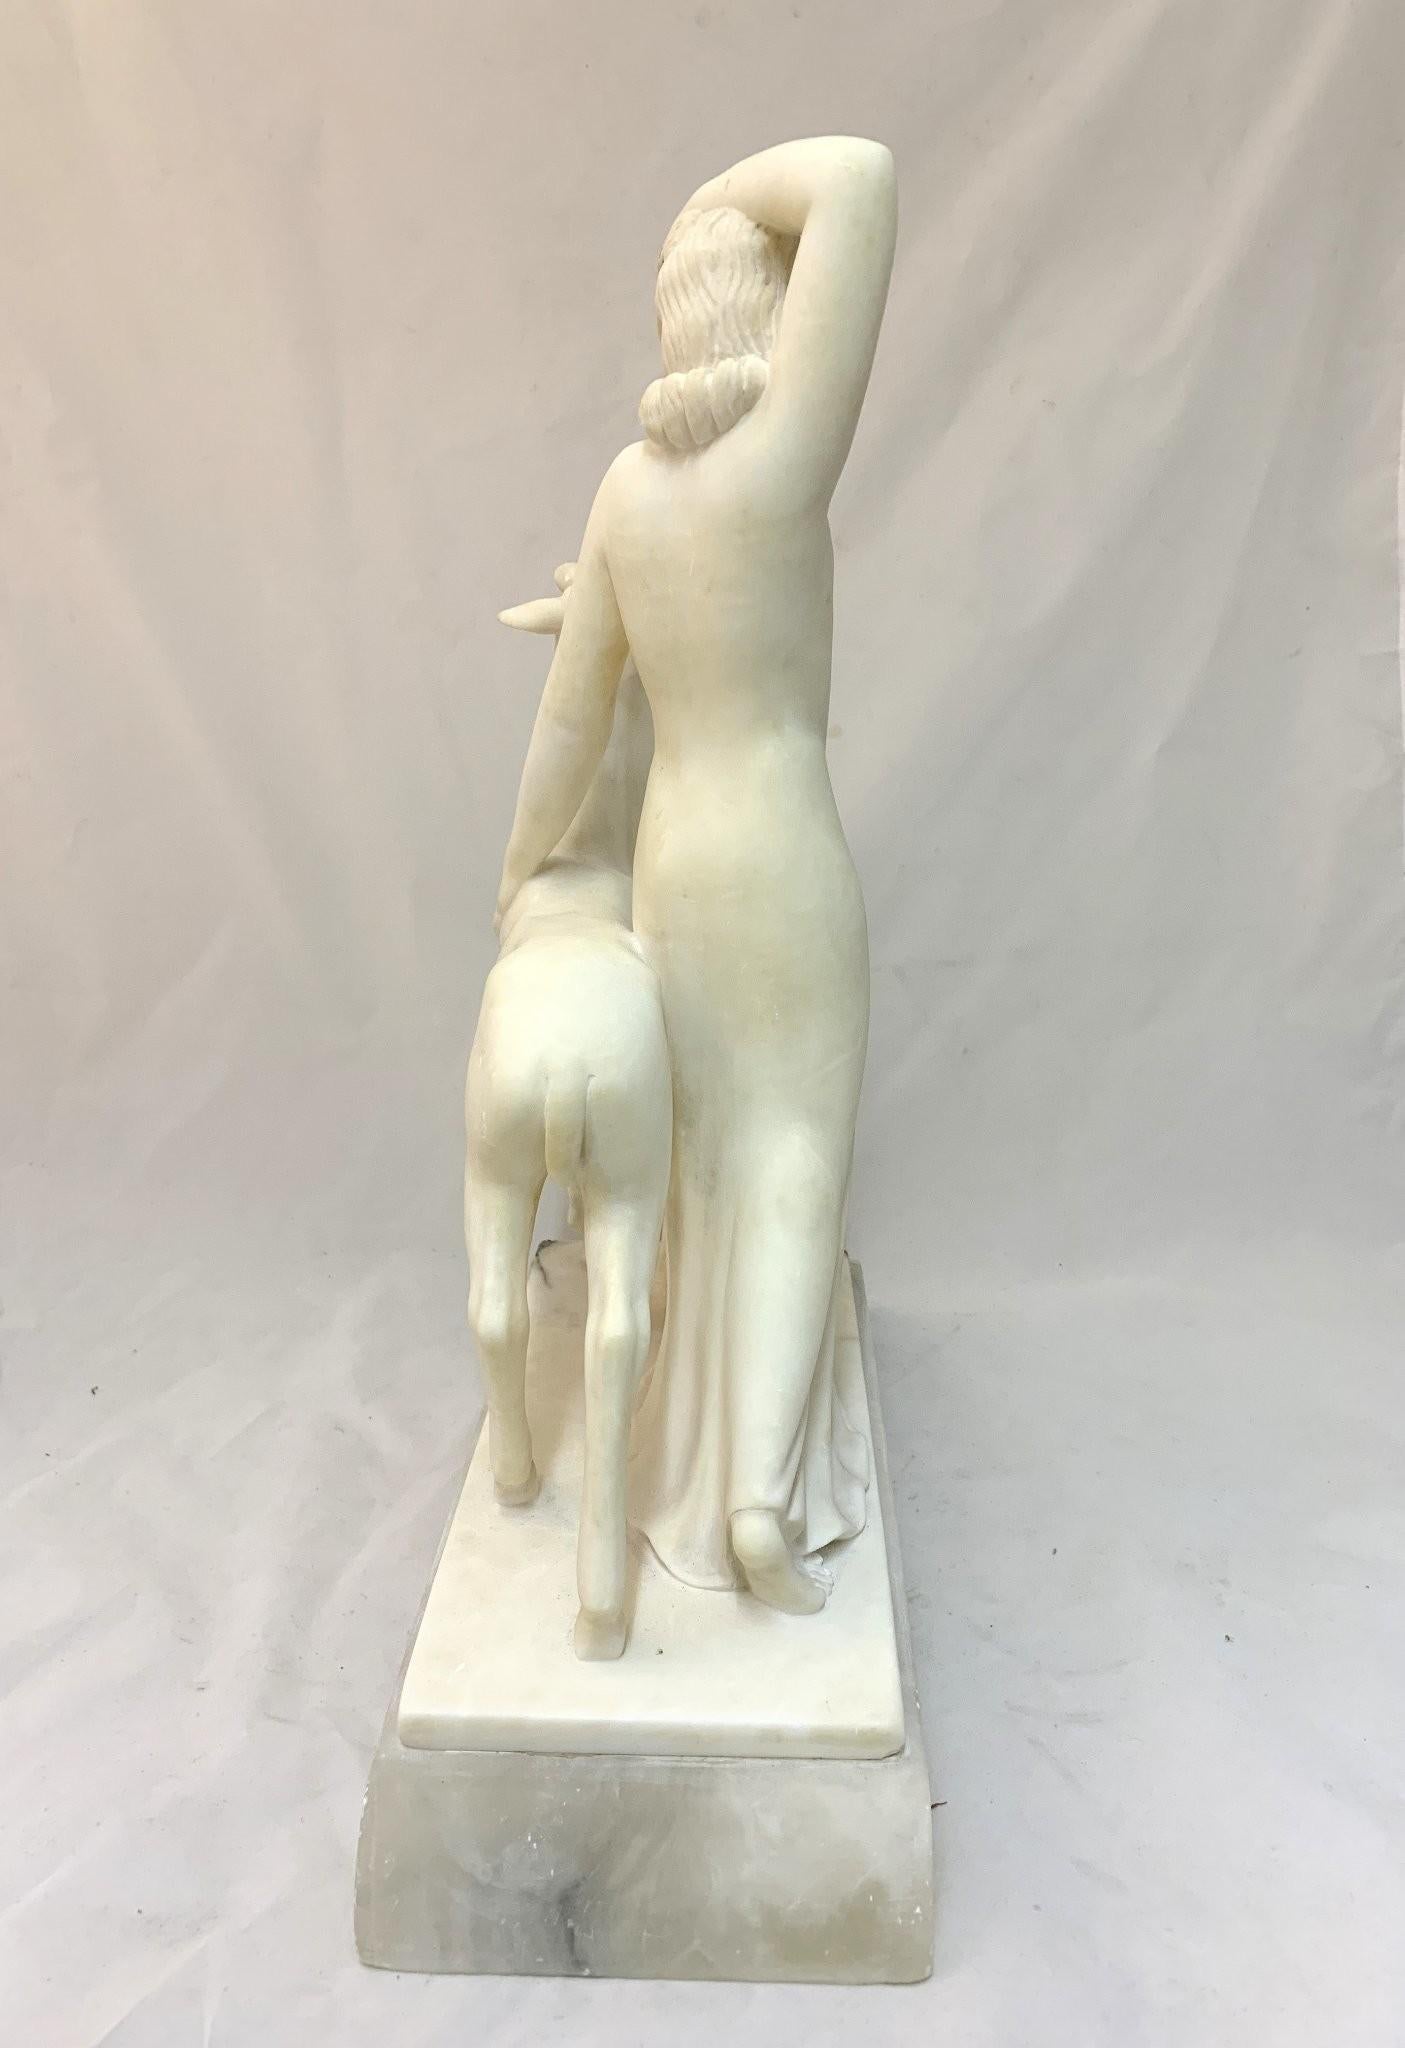 This authentic 1930s Art Deco sculpture depicts a lady with fawn, in a traditional Art Deco manner. It's sculpted out of alabaster and is on a marble base.
It's in good condition, one minor flaw is that the hand was broken off and is reglued and